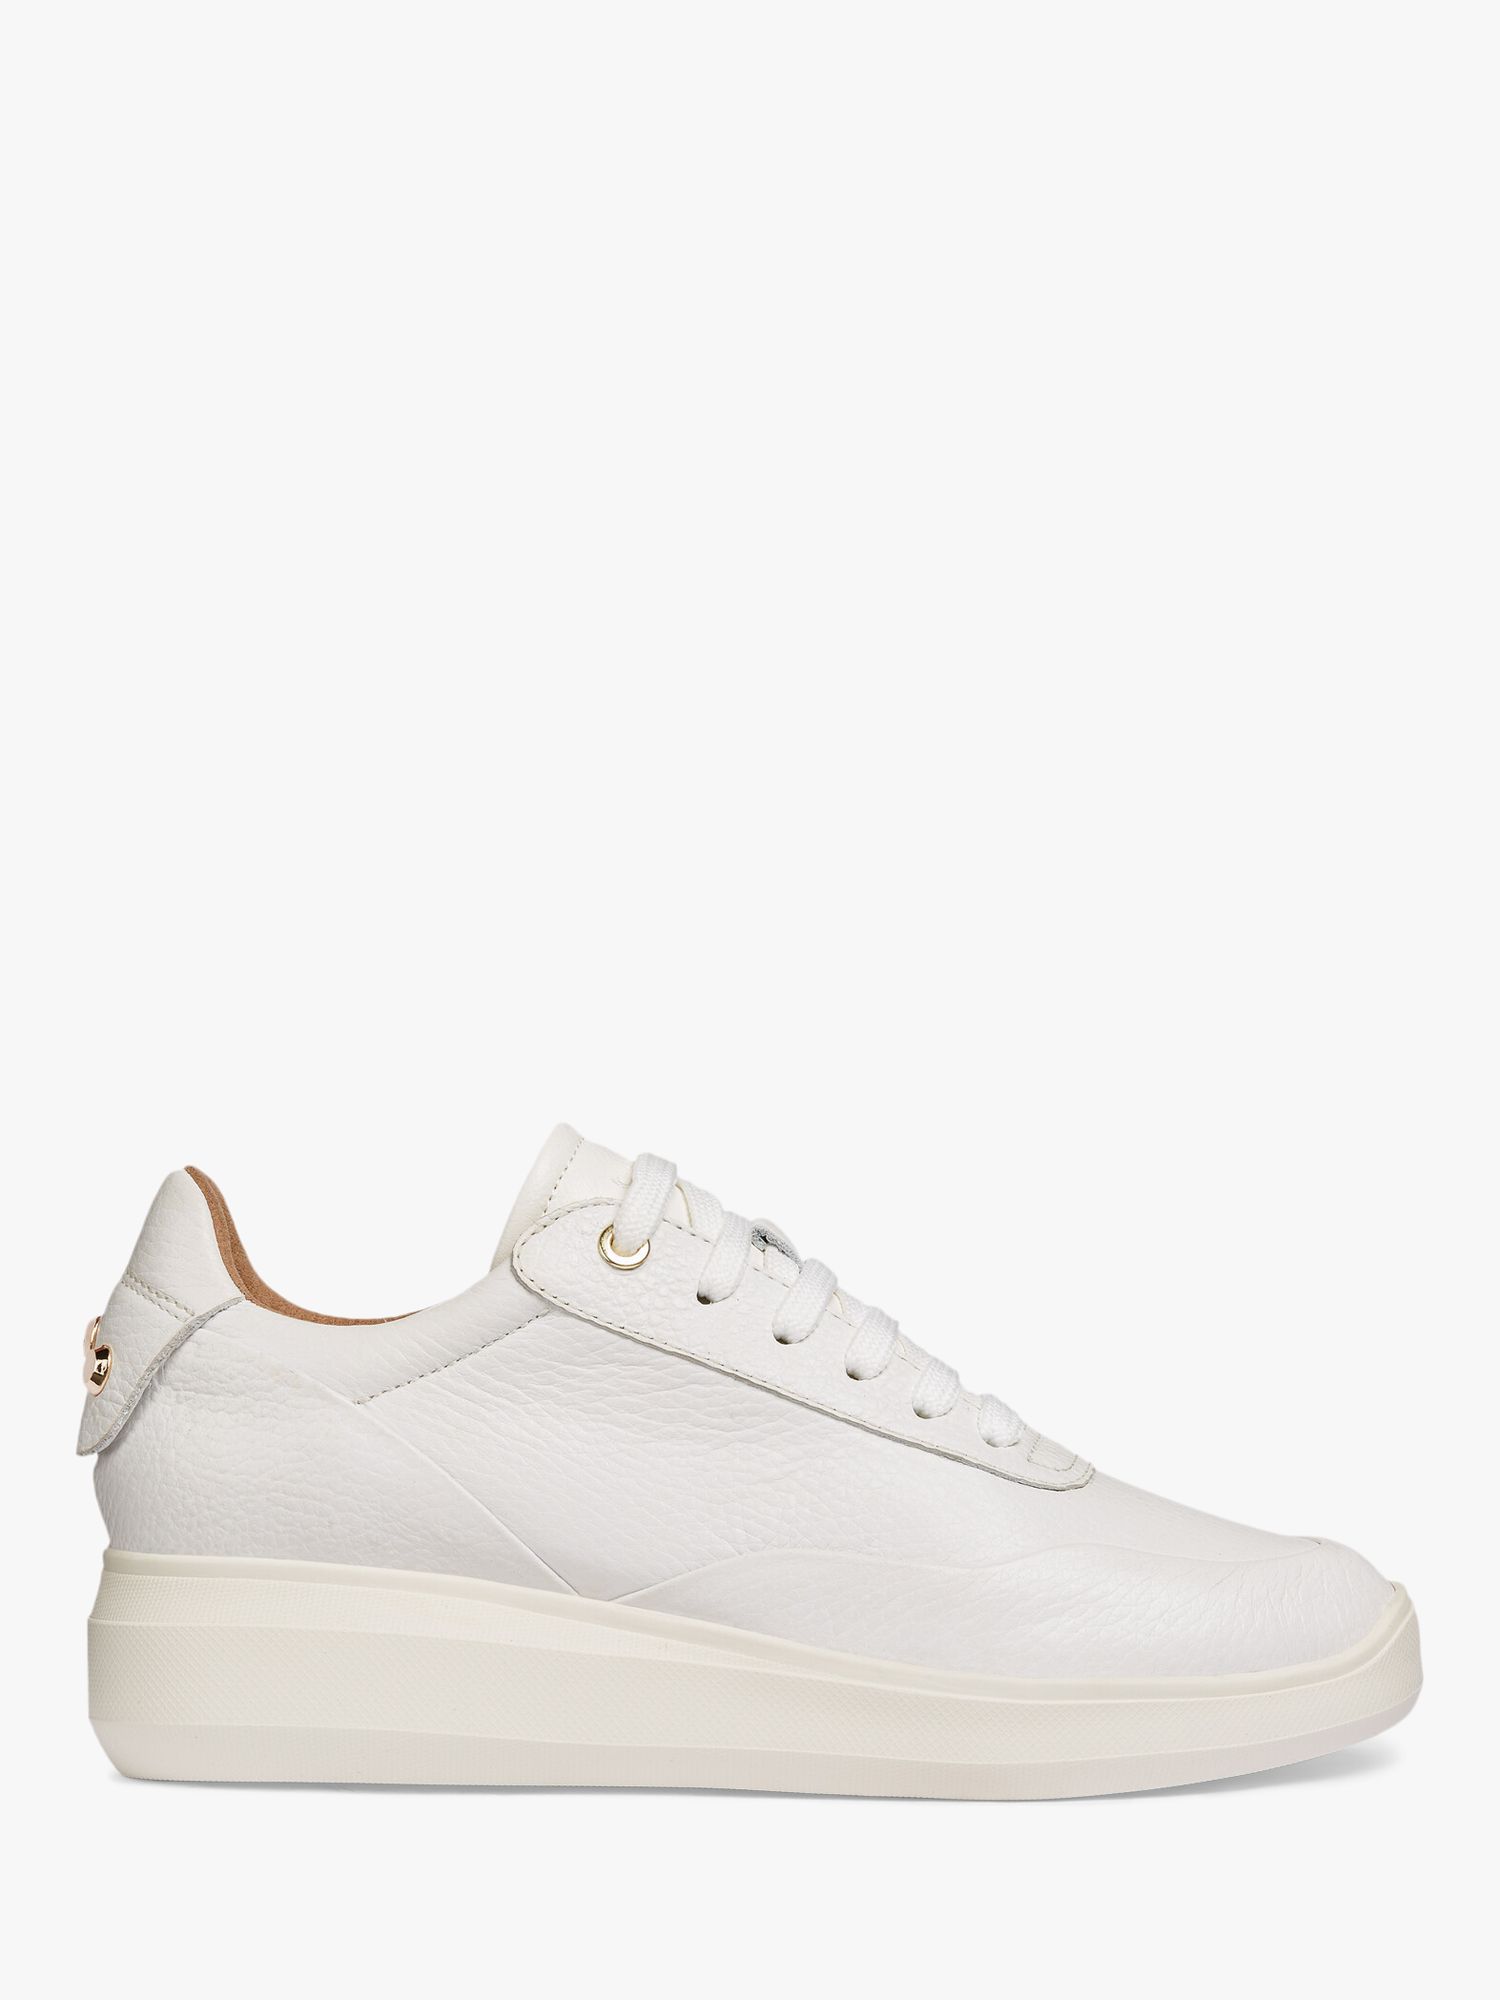 Geox Women's Rubidia Perforated Leather Trainers, White at John Lewis & Partners